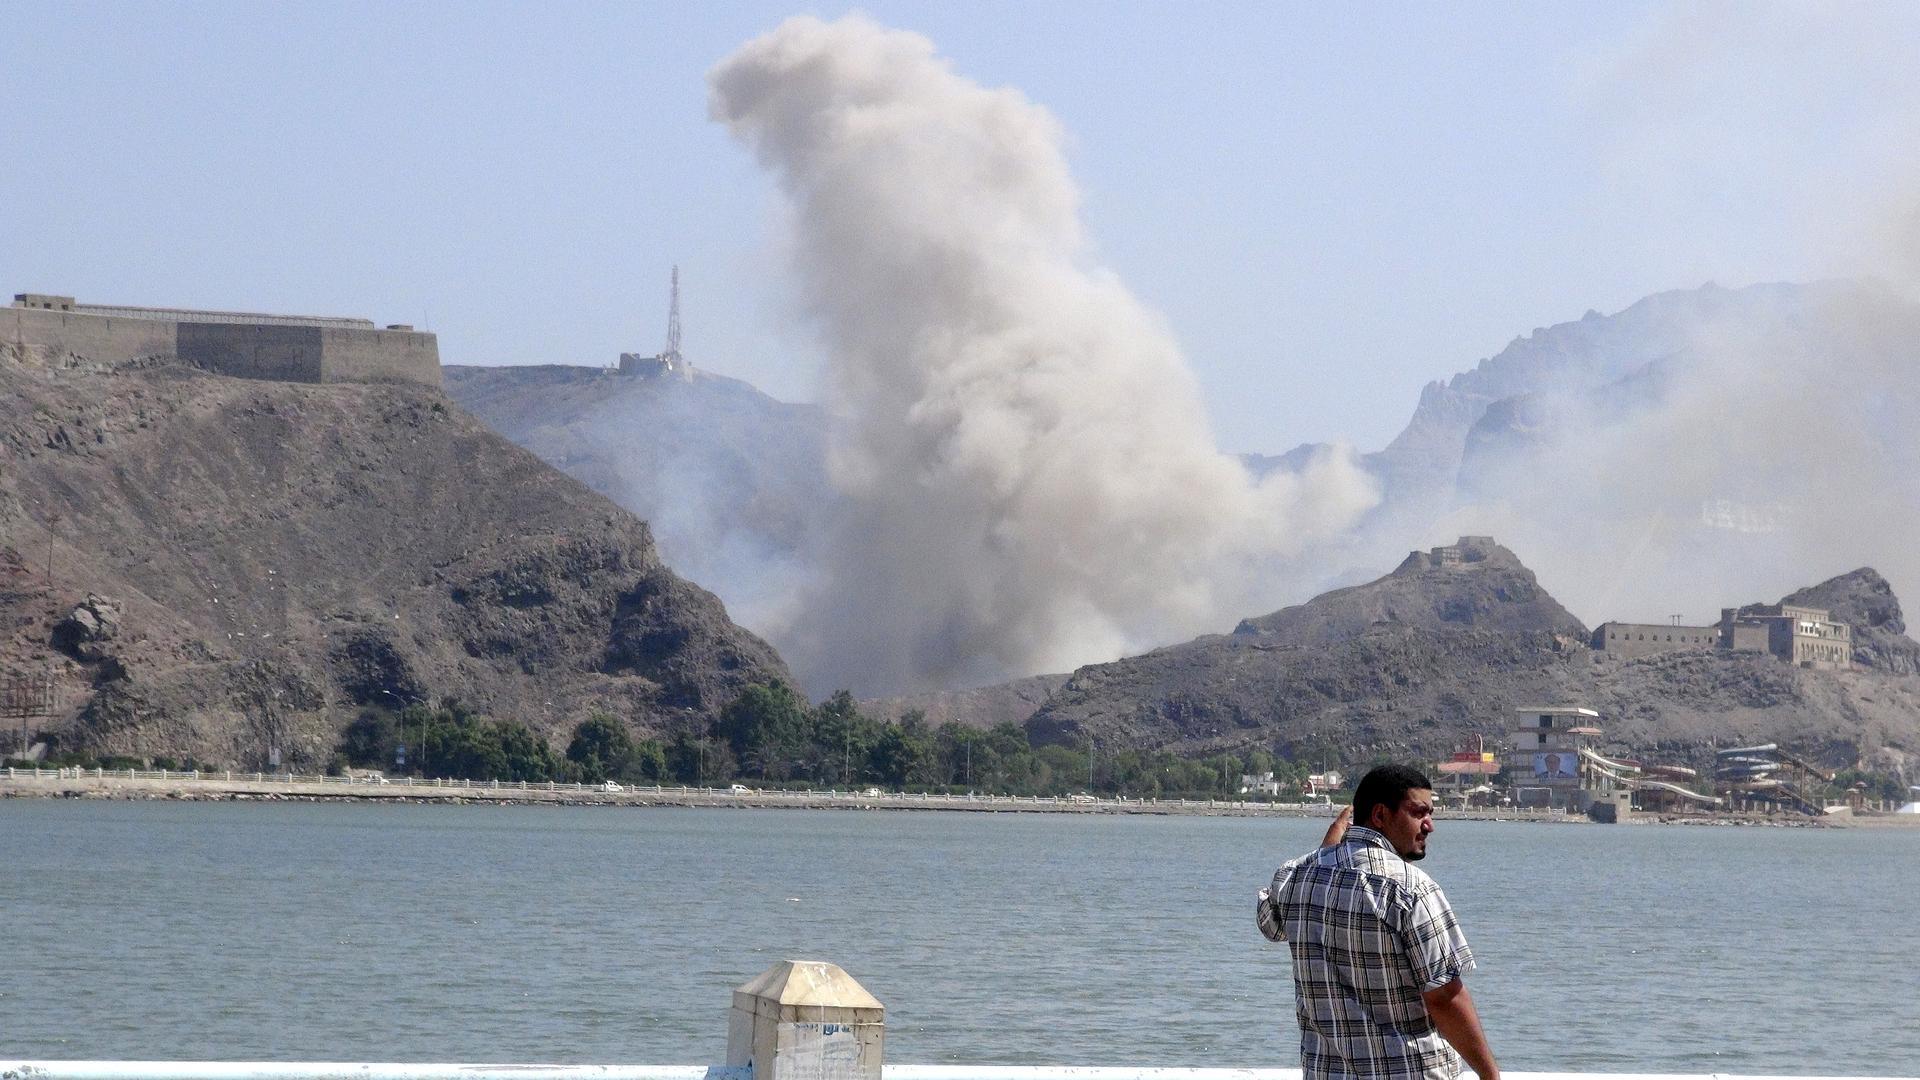 Smoke rises from an arms depot at the Jabal Hadeed military compound in Yemen's southern port city of Aden on March 28, 2015.